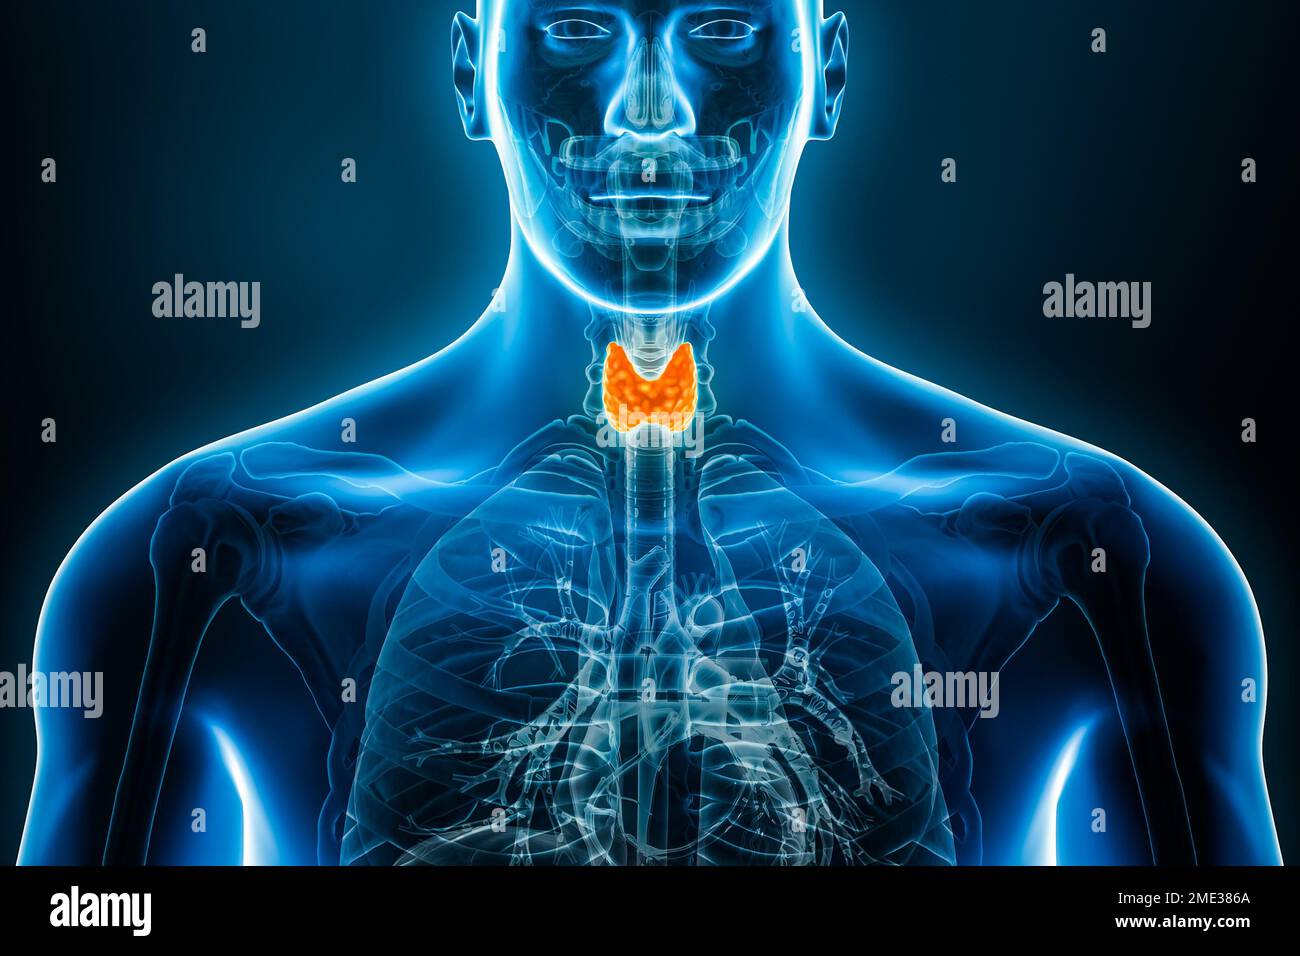 Anterior or front xray view of the thyroid gland 3D rendering illustration with male body contours. Human anatomy, medical, biology, science, healthca Stock Photo